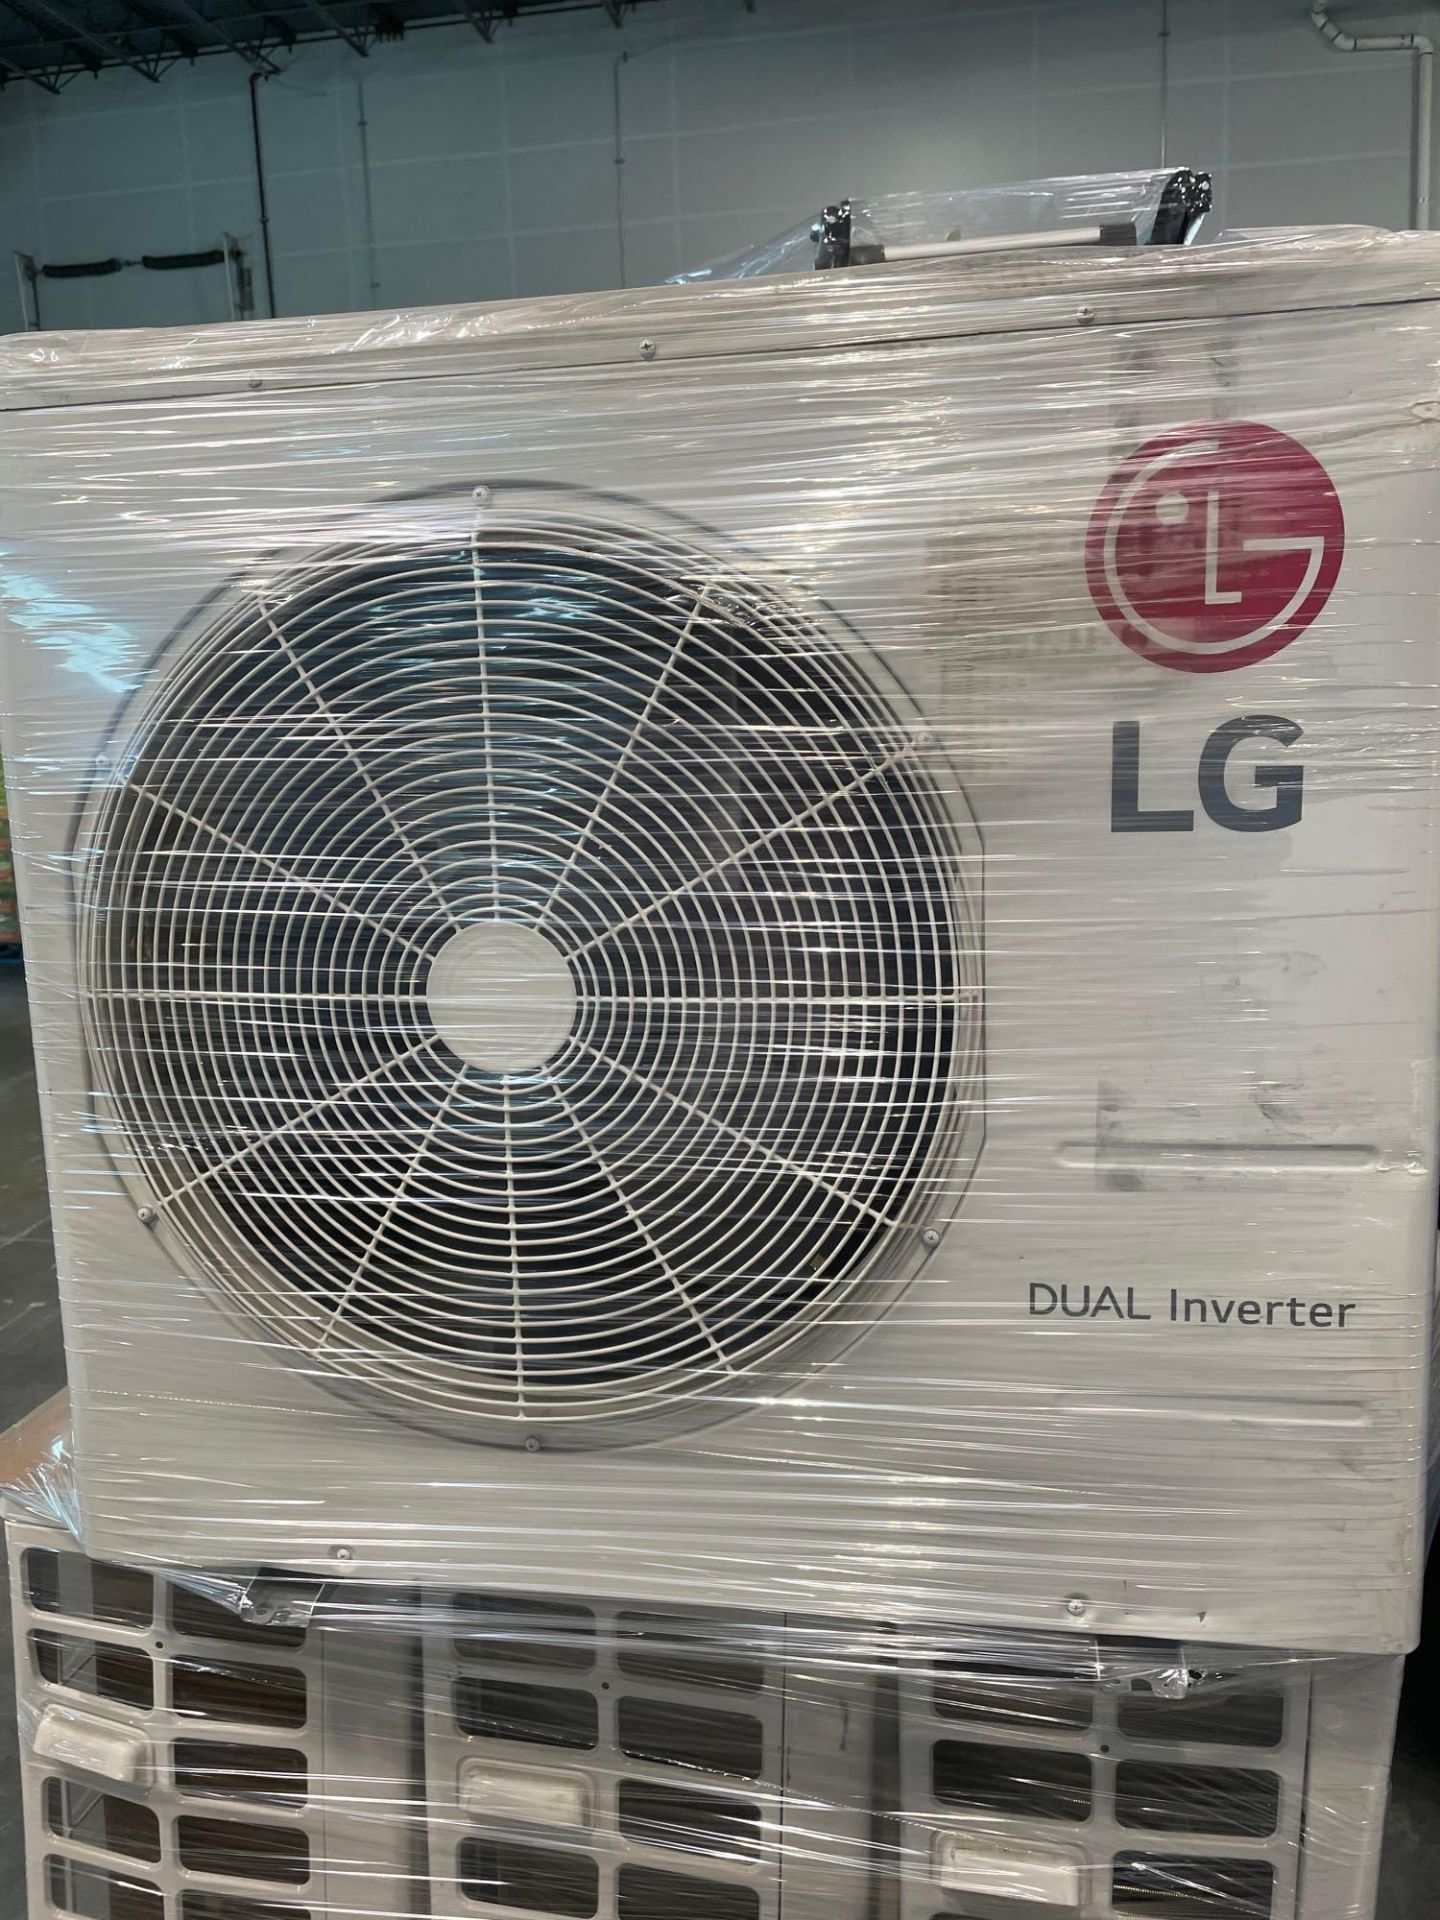 pallet of multiple LG dual inverter industrial AC units - Image 3 of 4